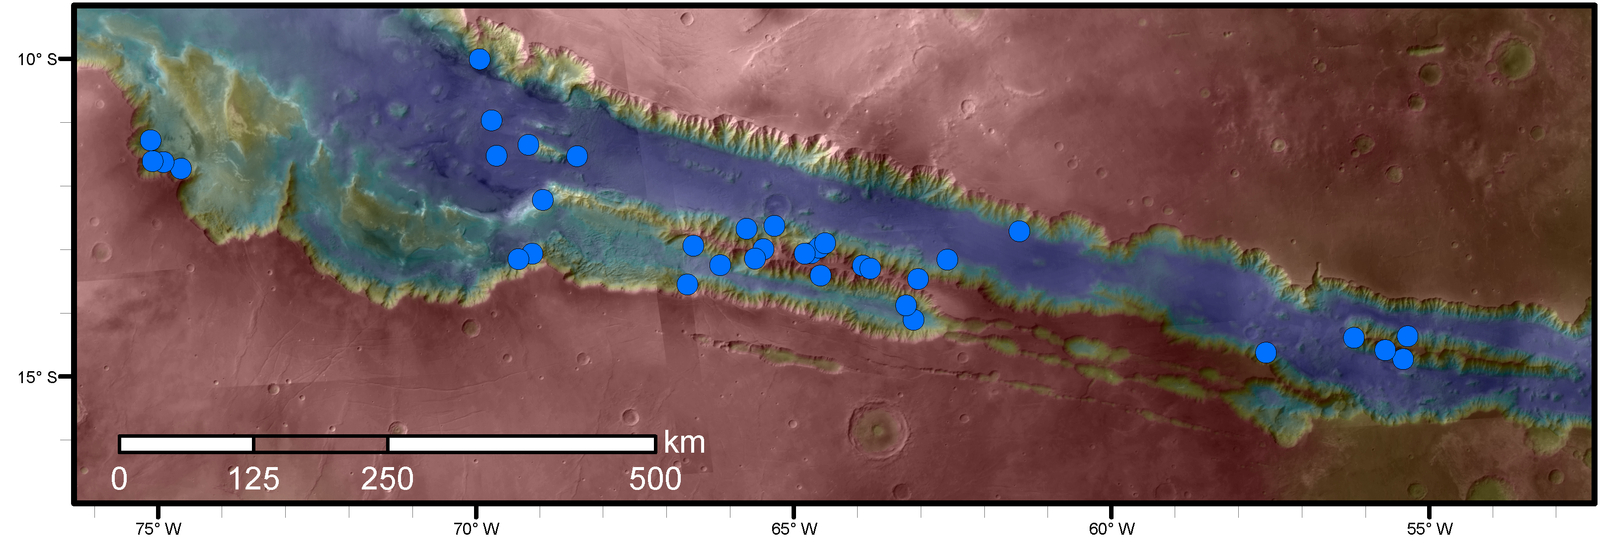 Blue dots on this map indicate sites of recurring slope lineae (RSL) in part of the Valles Marineris canyon network on Mars. RSL are seasonal dark streaks that may be indicators of liquid water. The area mapped here has the highest density of known RSL on Mars.